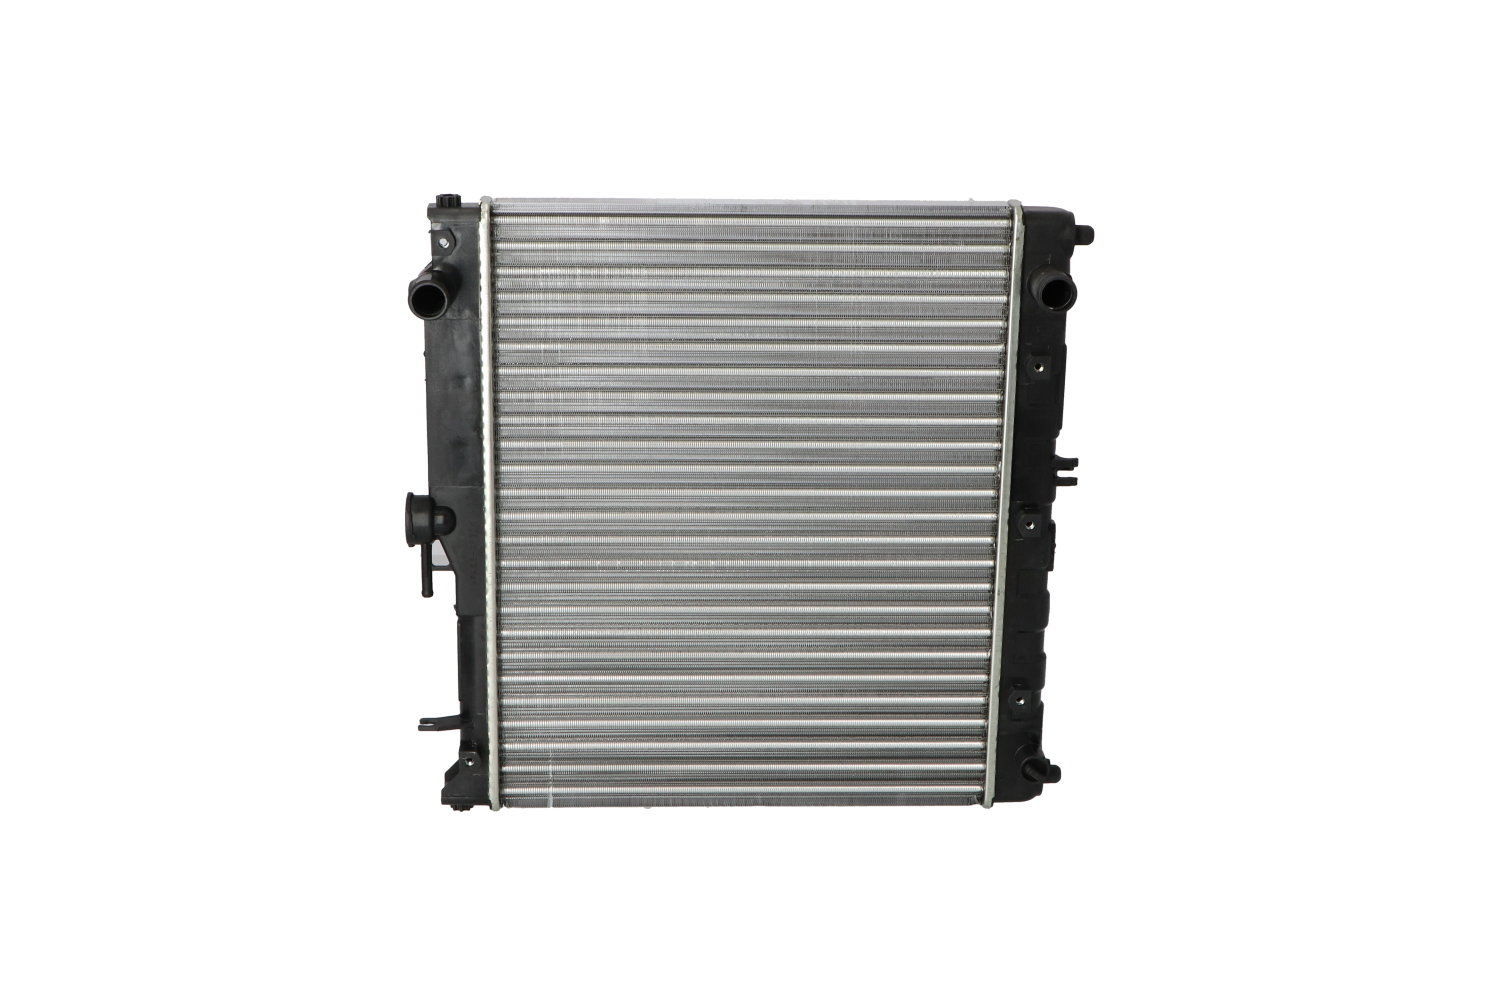 NRF 53930A Engine radiator Aluminium, 448 x 375 x 25 mm, Mechanically jointed cooling fins